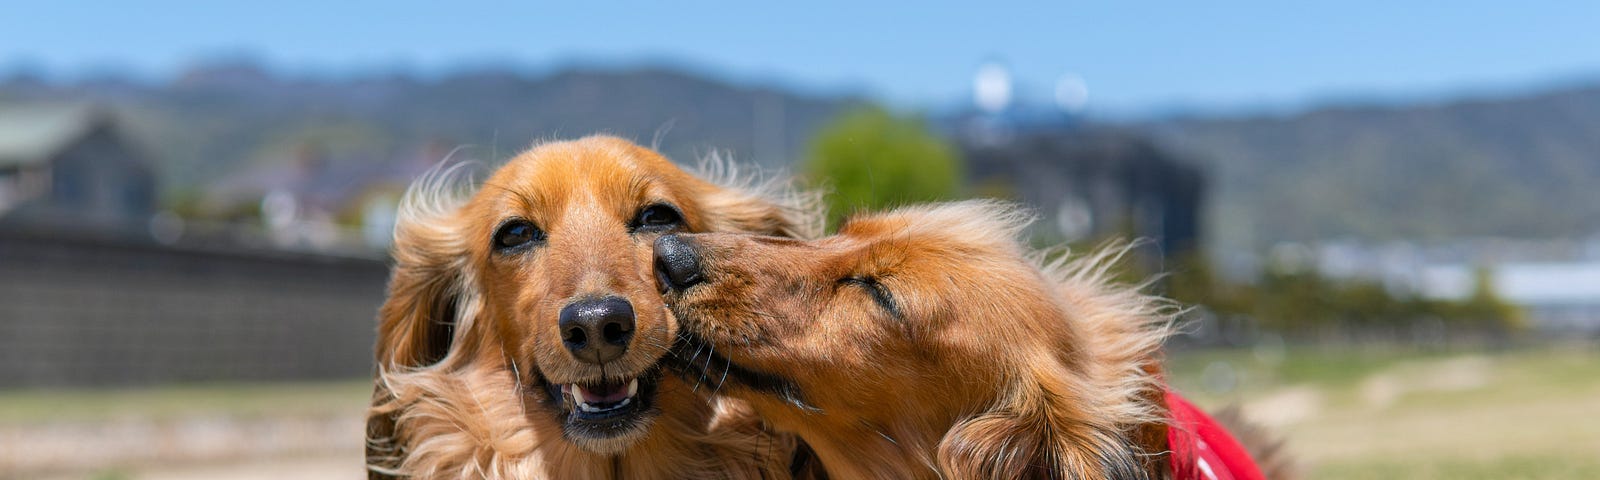 A long haired dog kisses her doggy companion